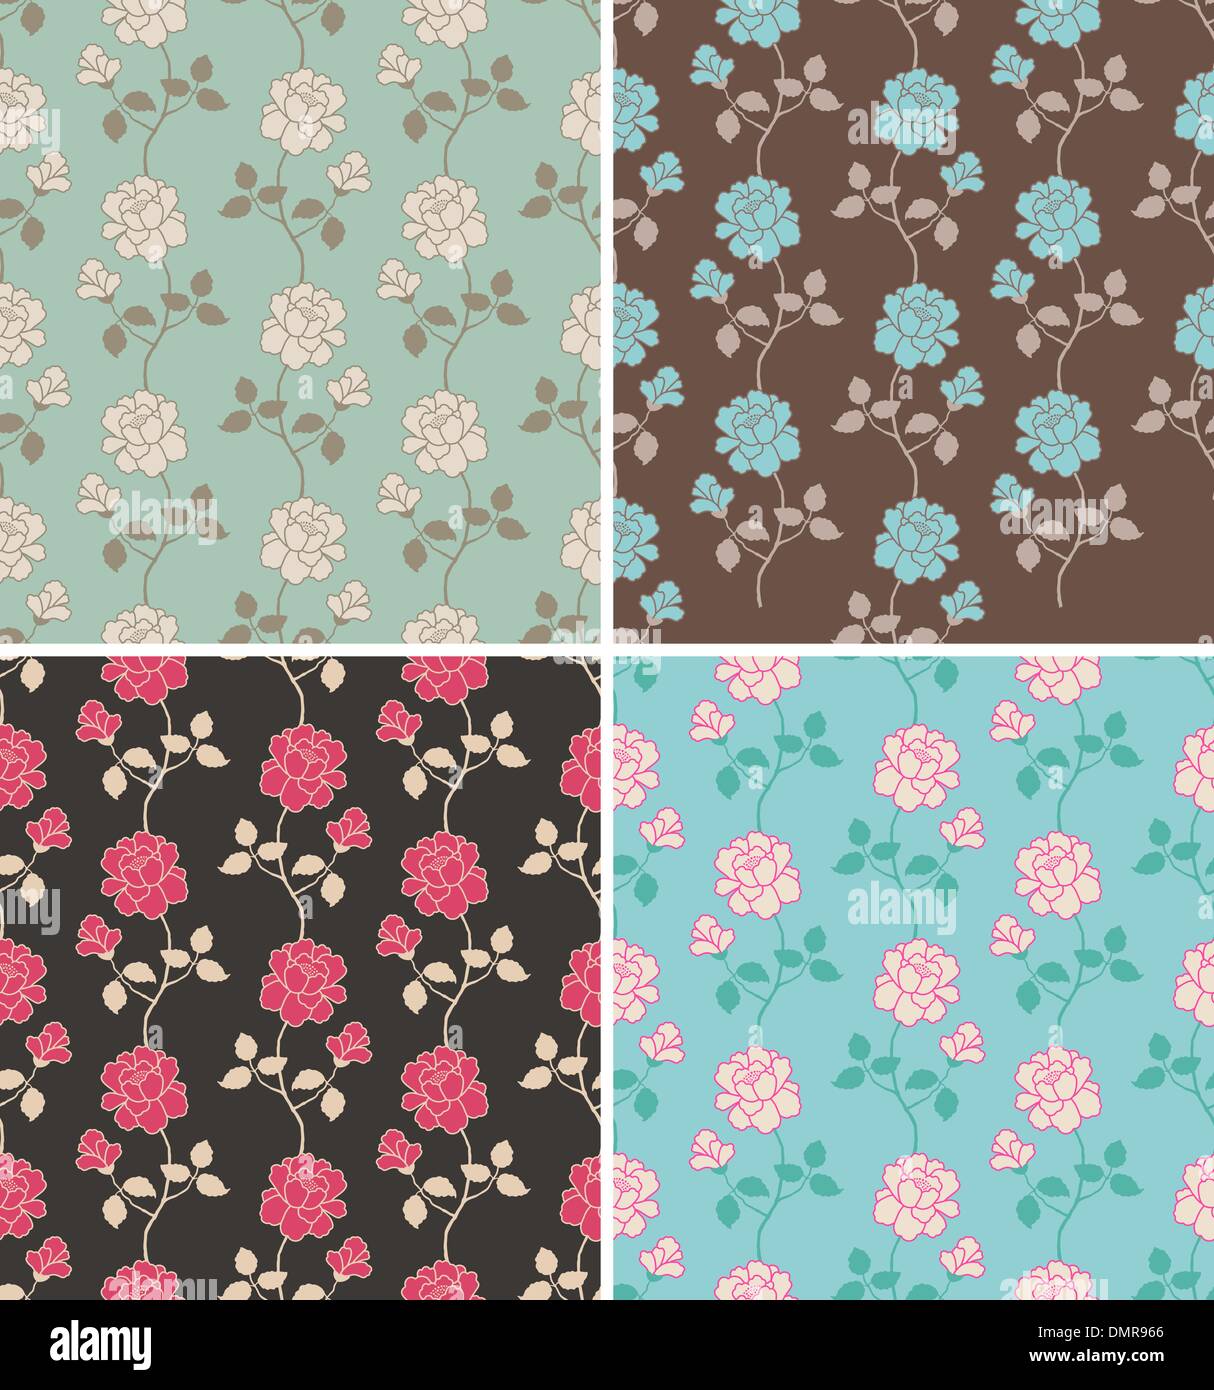 floral patterns Stock Vector